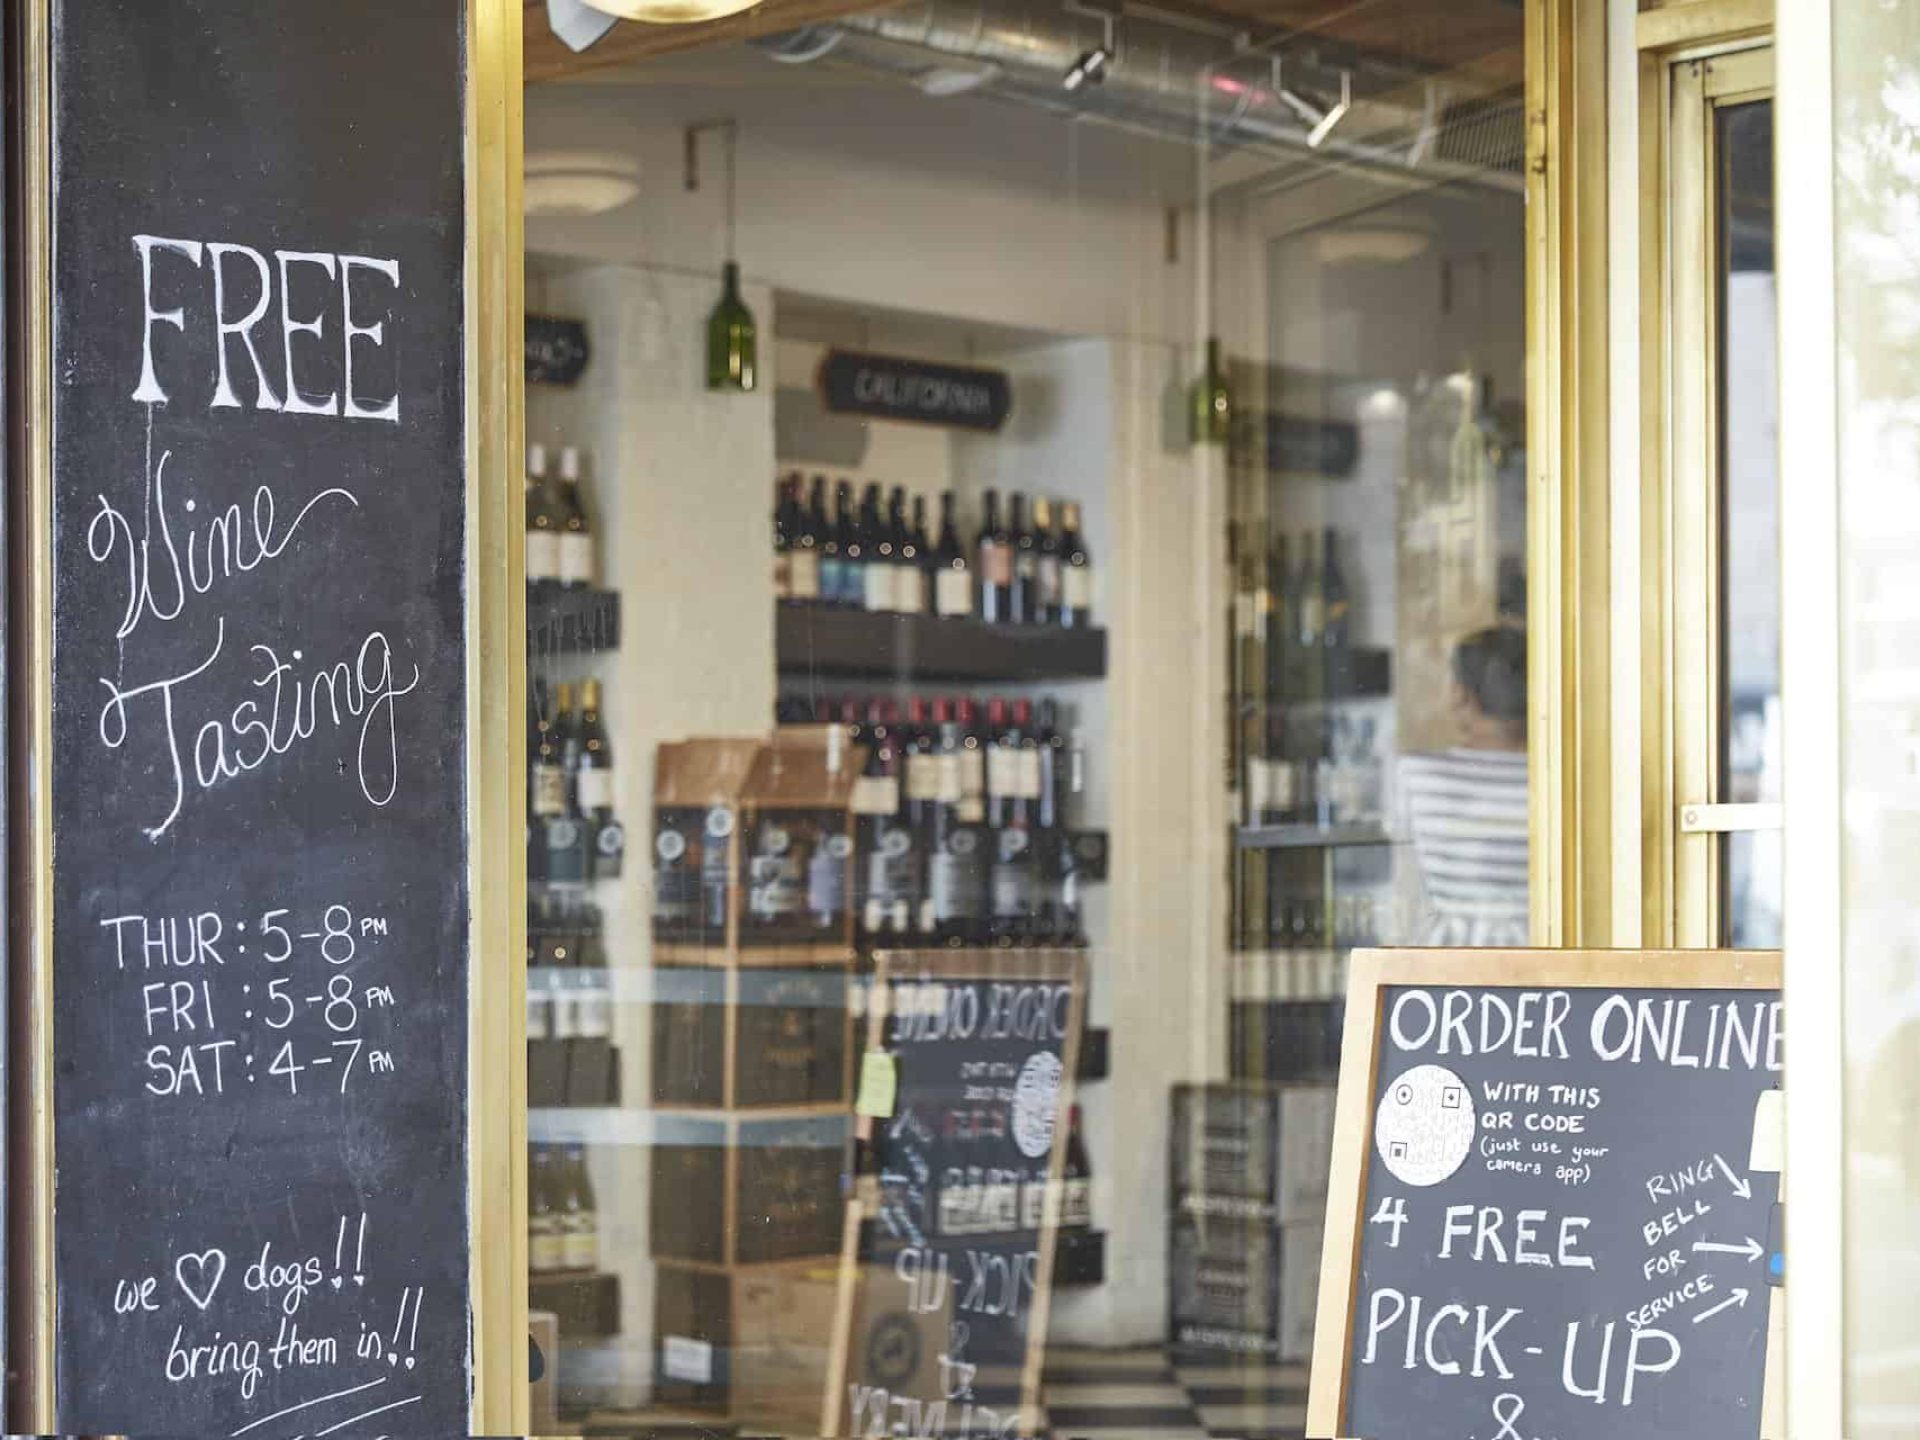 Close up of entrance to a wine shop in New York. Large windows with chalkboard signs promoting wine tasting times.